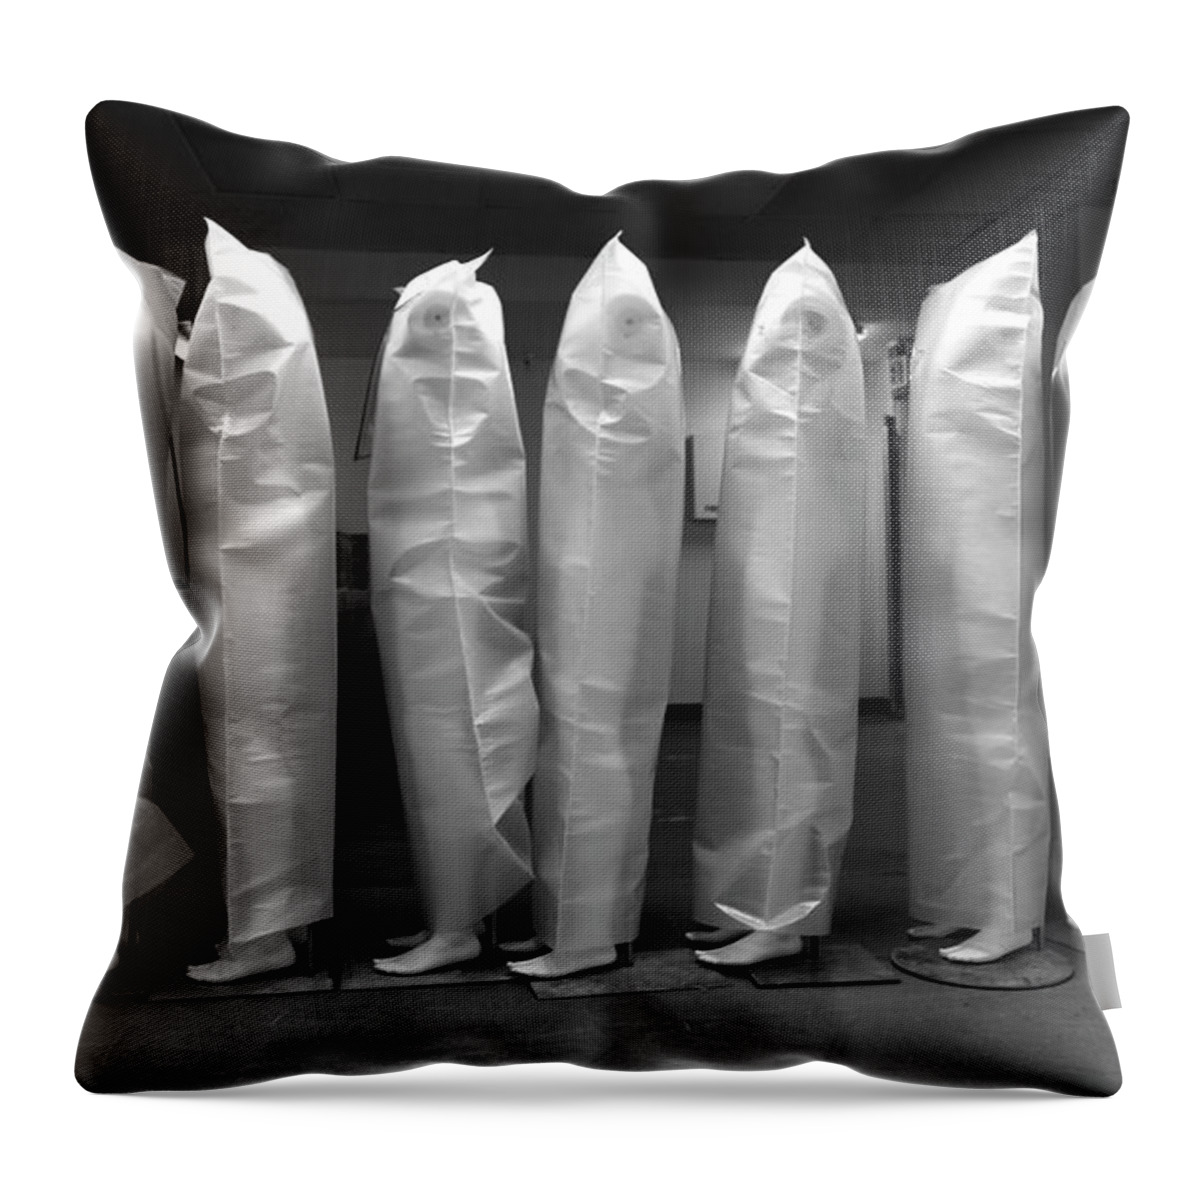 Mannequins Throw Pillow featuring the photograph Mannequins March by Rick Wilking